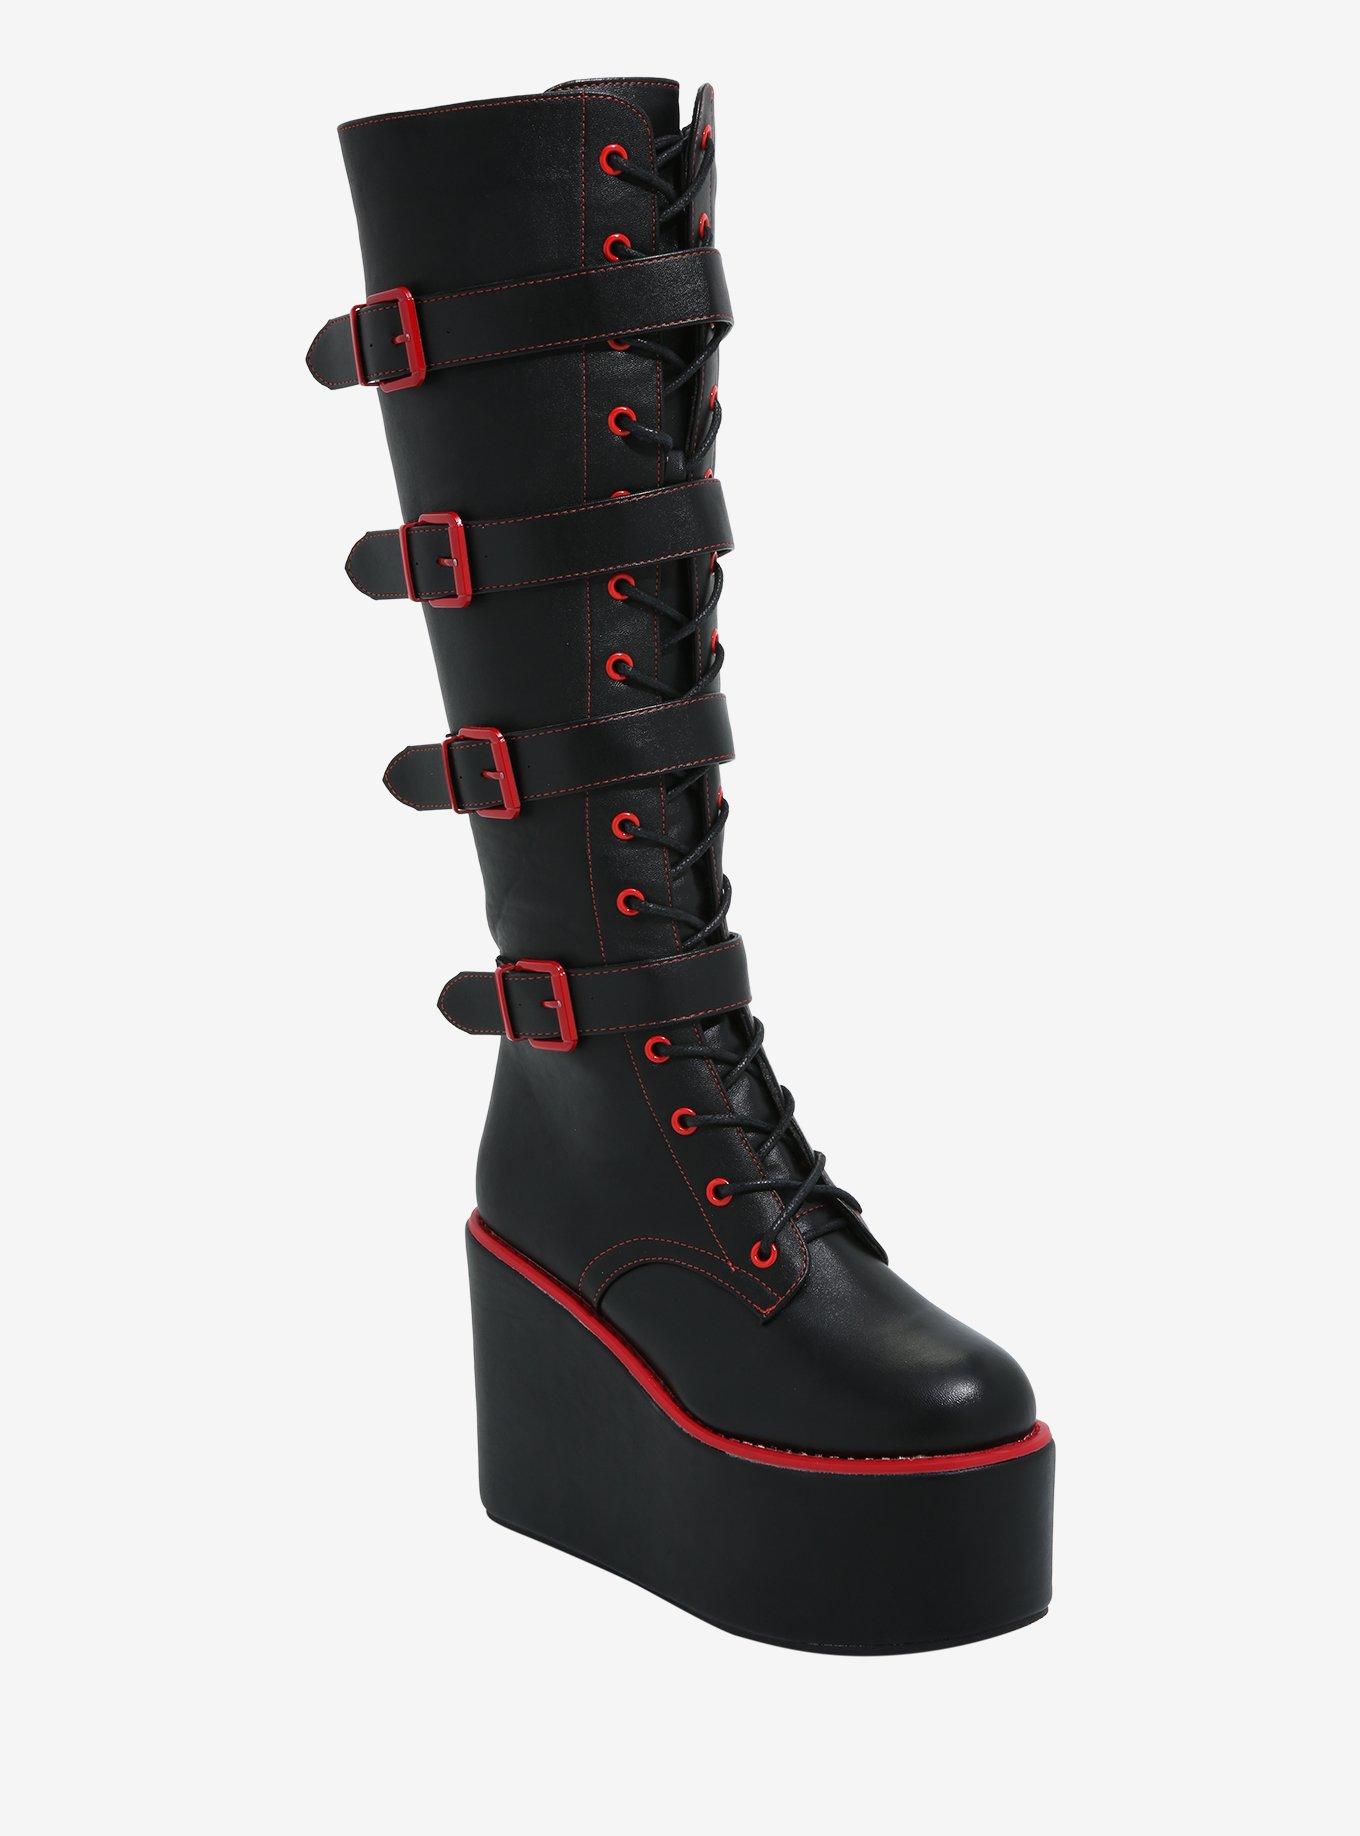 Red Knee High Vinyl Zip Back Boots, Shoes